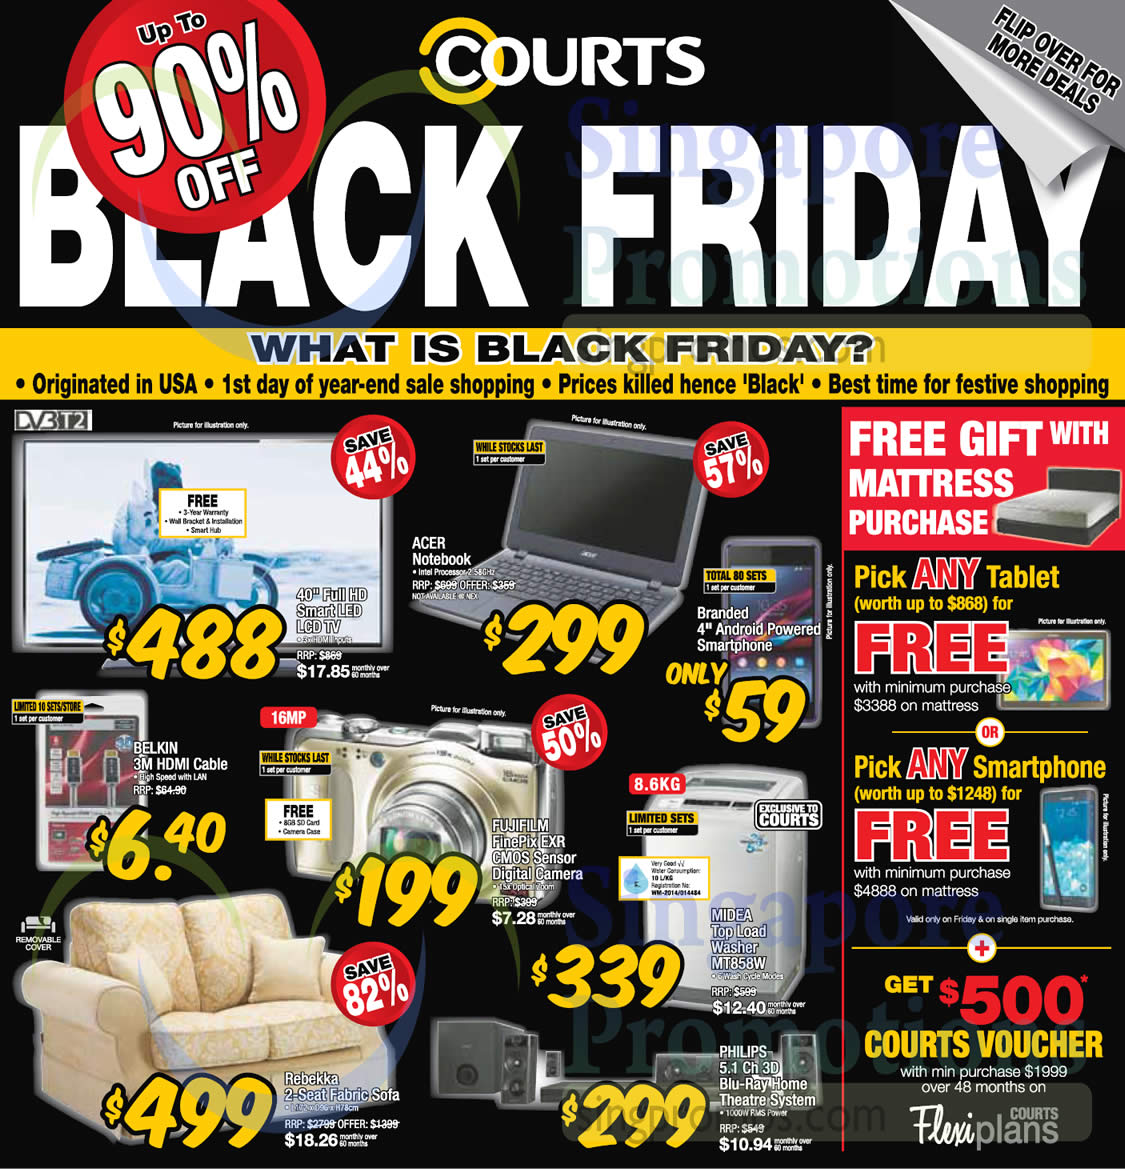 Courts Up To 90% Off 1-Day Black Friday Sale 28 Nov 2014 - Who Has Best Black Friday Deals 2014